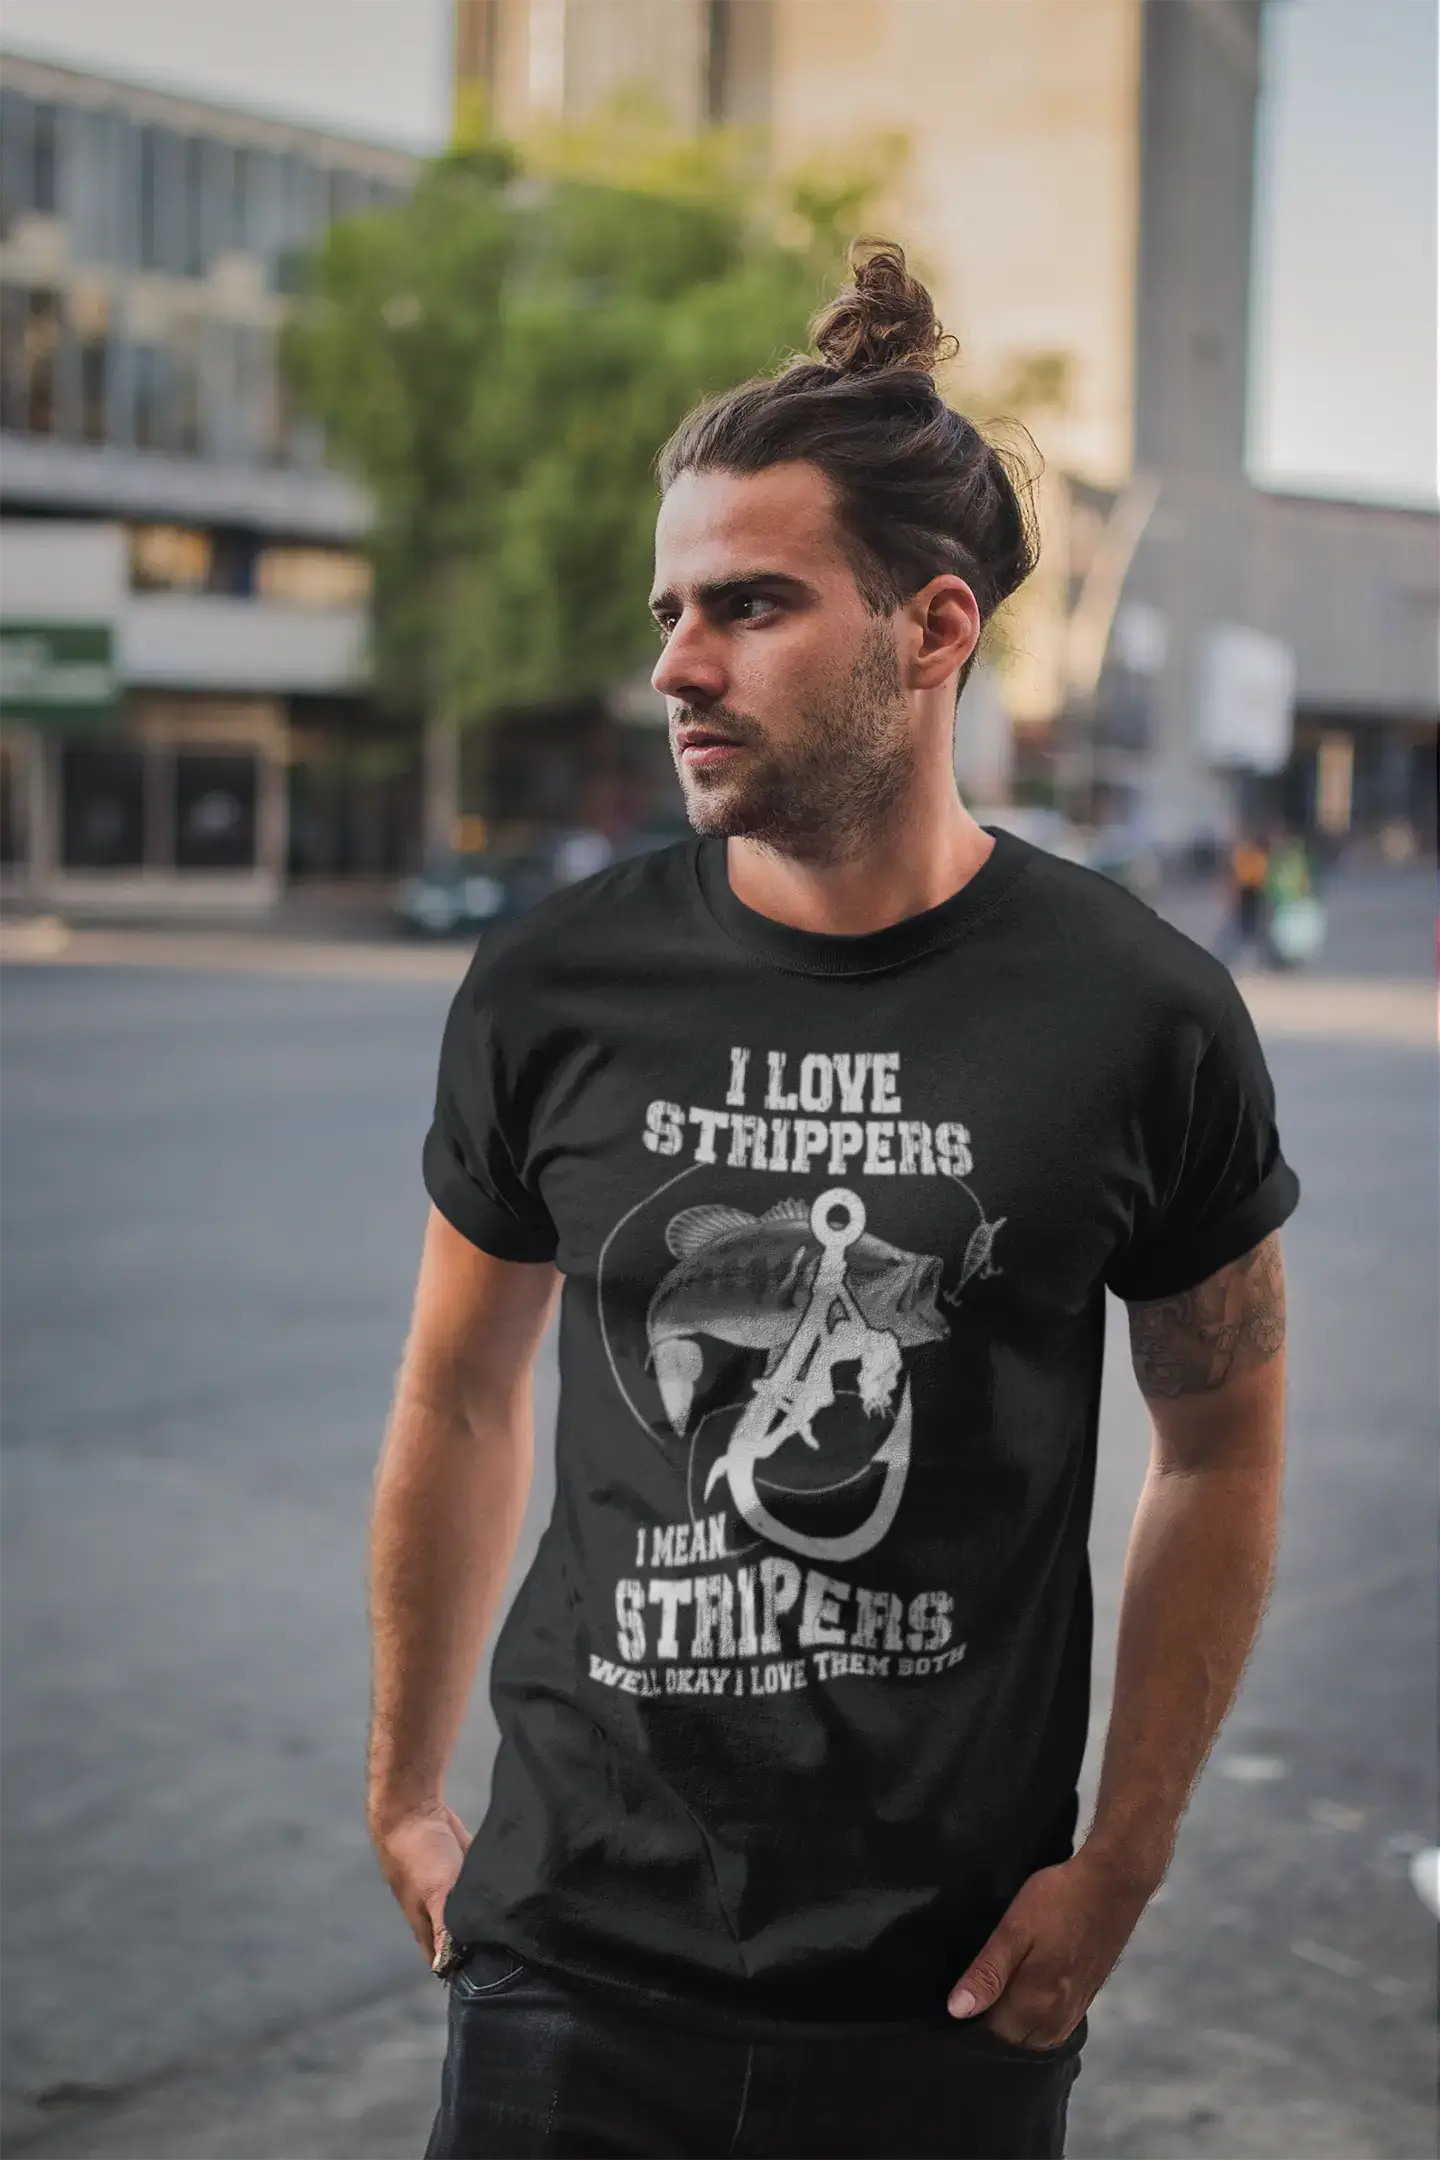 ULTRABASIC Men's T-Shirt I Love Strippers I Mean Stripers - Funny Quote Fisherman Tee Shirt